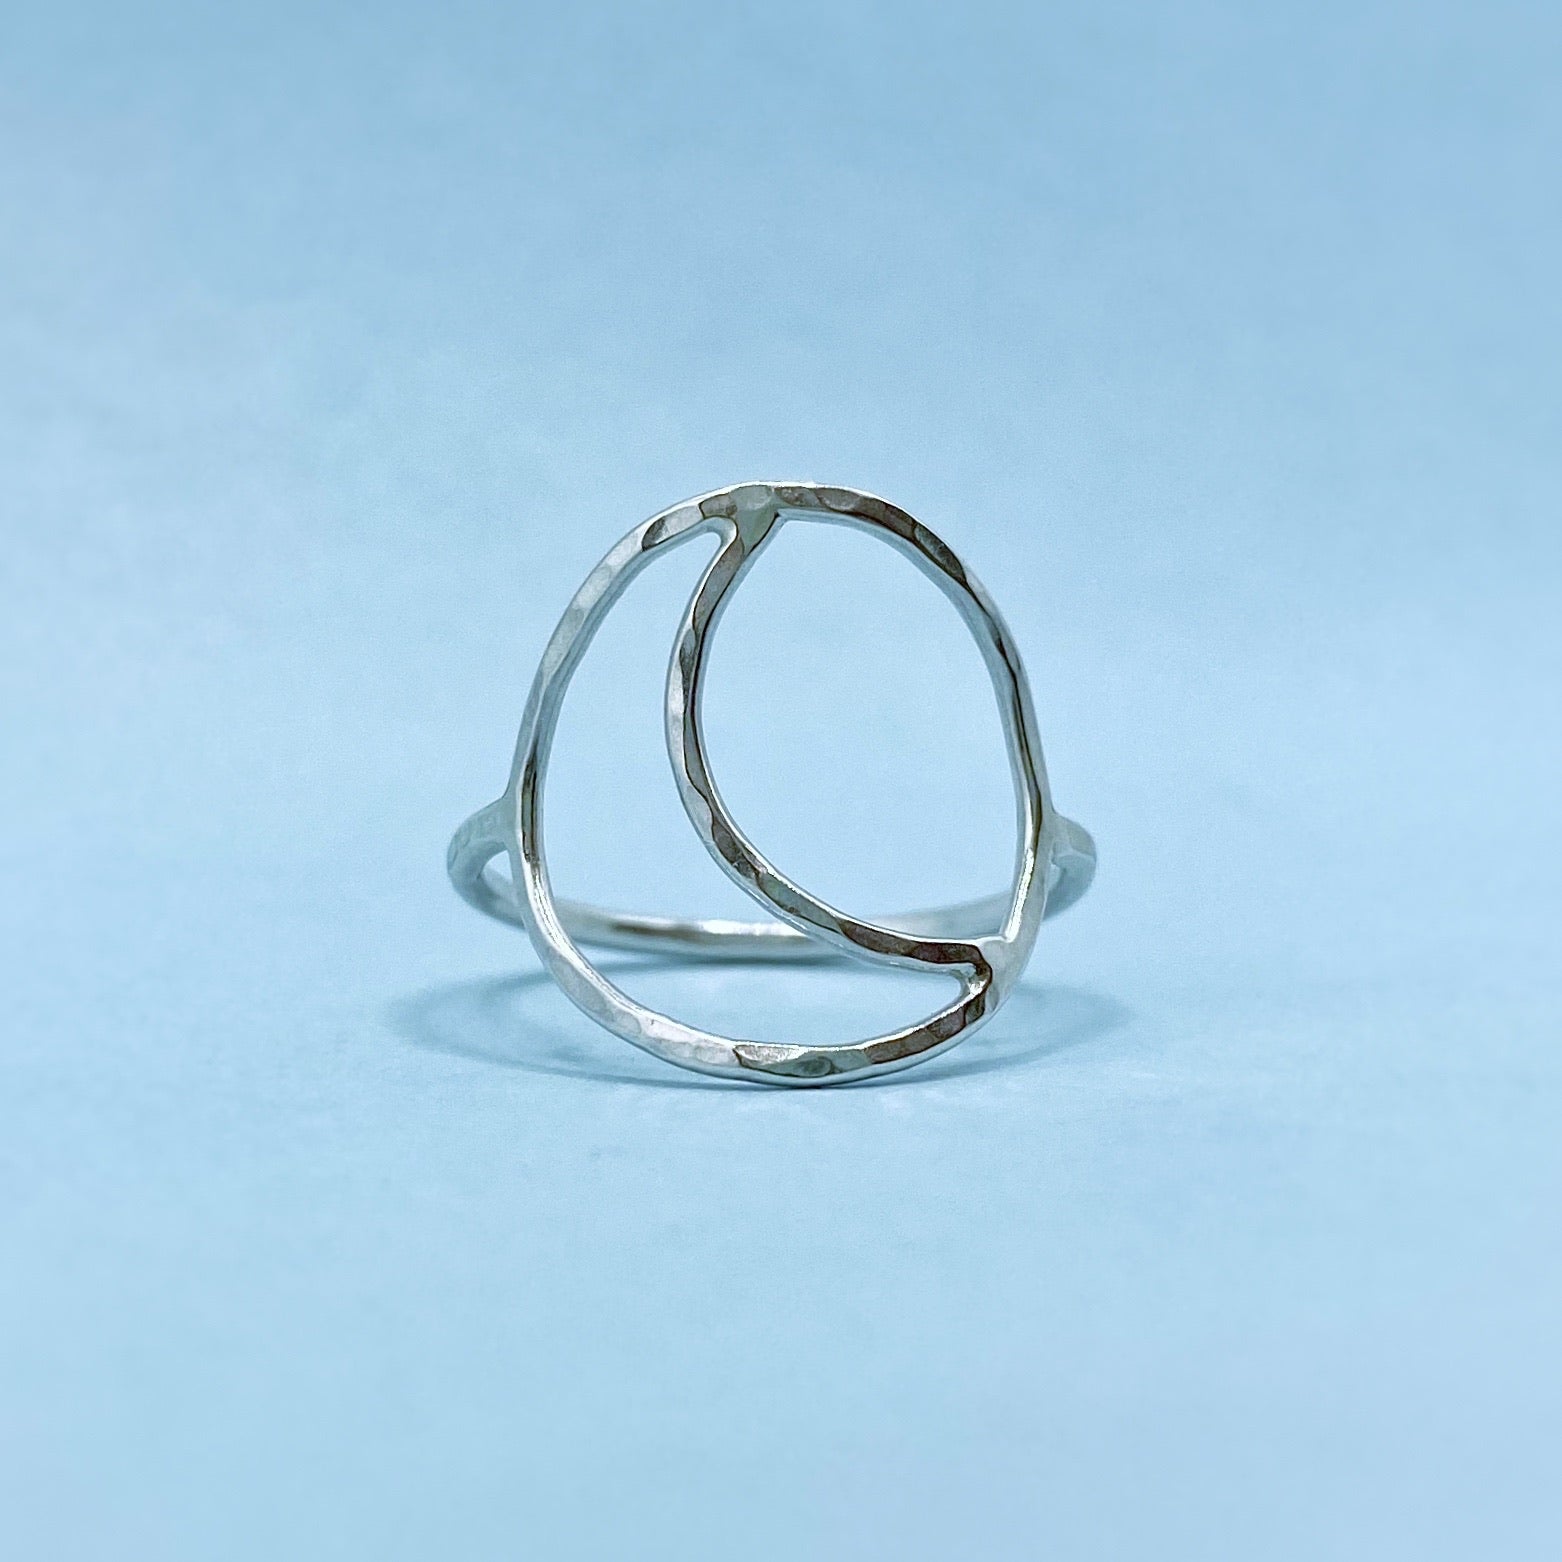 Rolled Ring Forging: What Is It? How Does It Work? Seamless